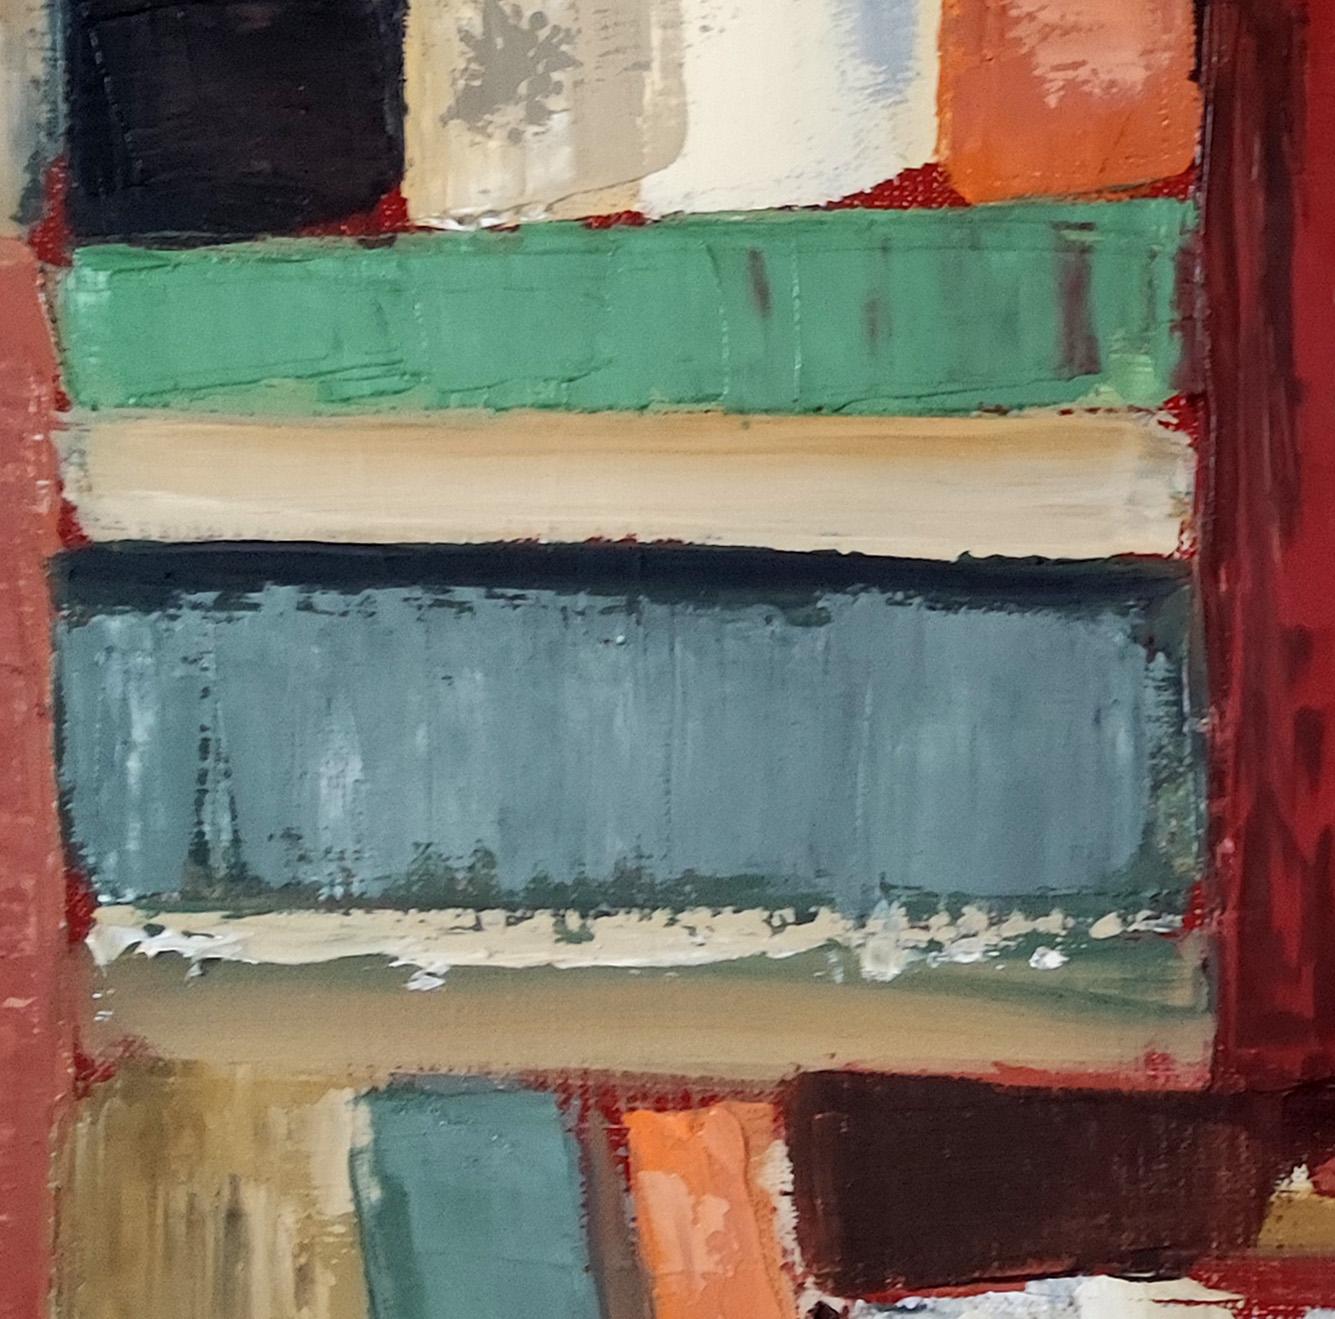 geometric abstract painting of books in a library.
The colors are muted, mixing warm and cold colors.
The library is a favorite subject of the artist who began his series in 2016 and is still relevant
Oil on canvas worked with a knife with a fairly